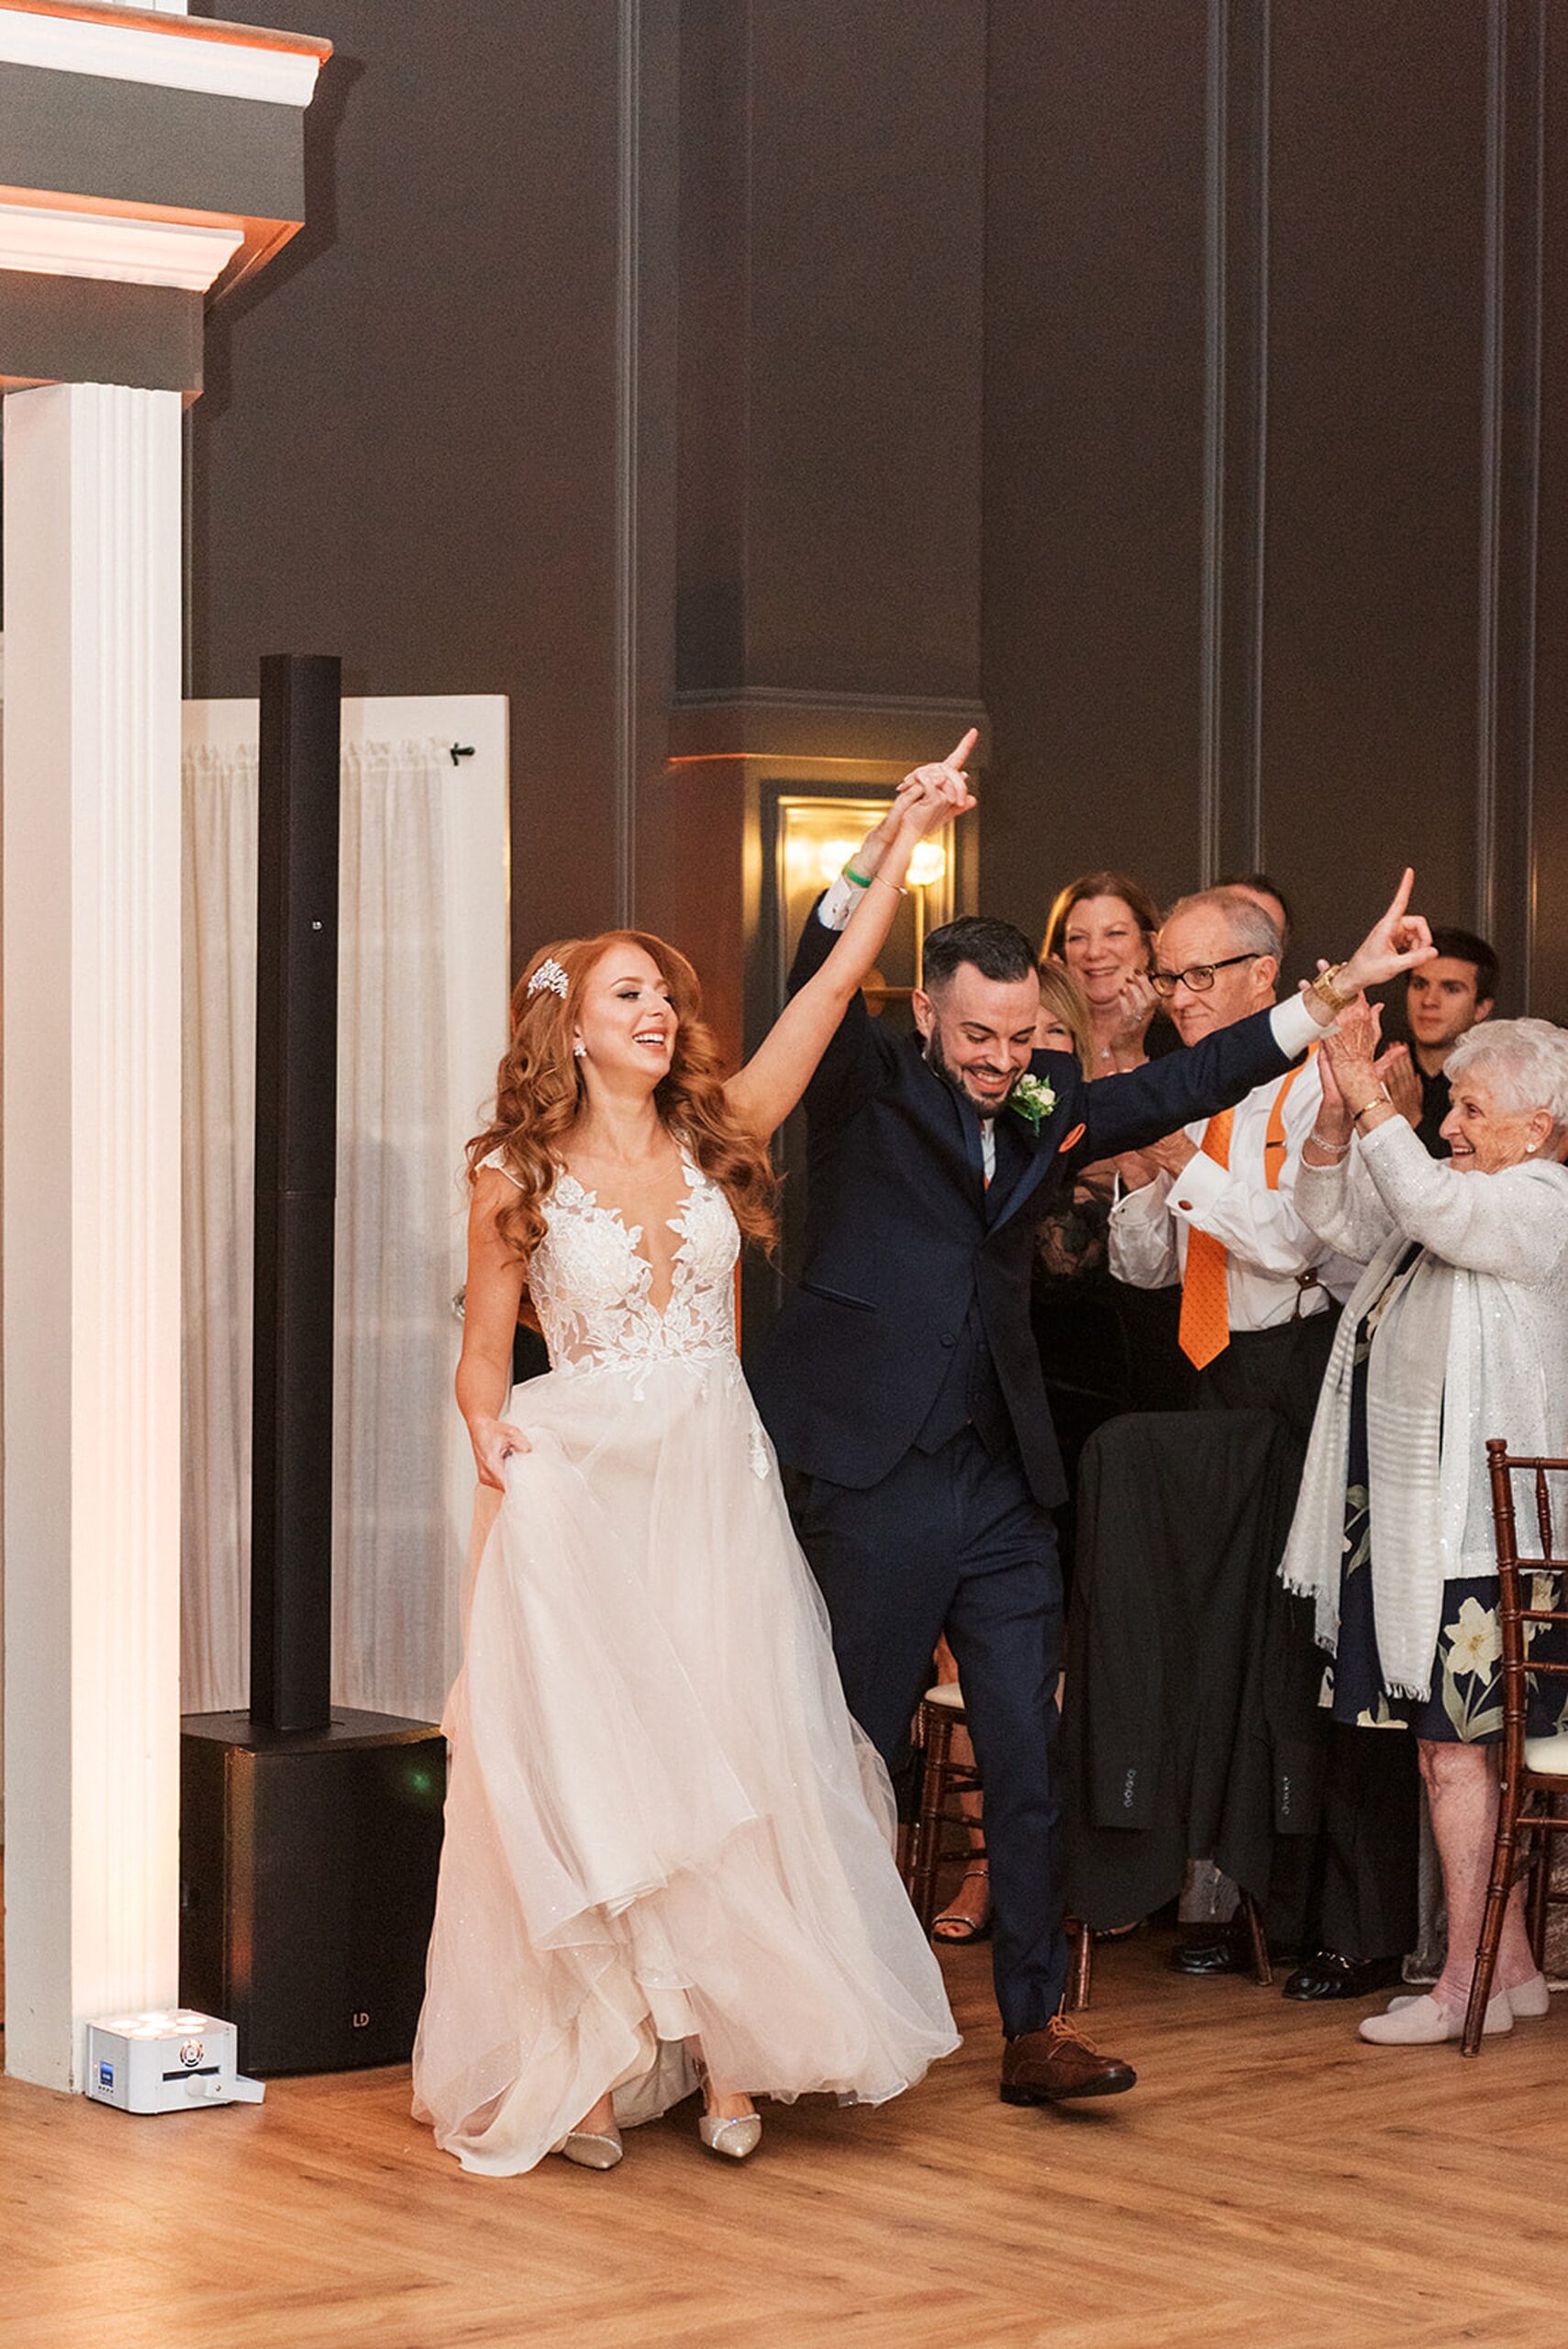 Newlyweds celebrate with heir guests as they enter the wedding reception